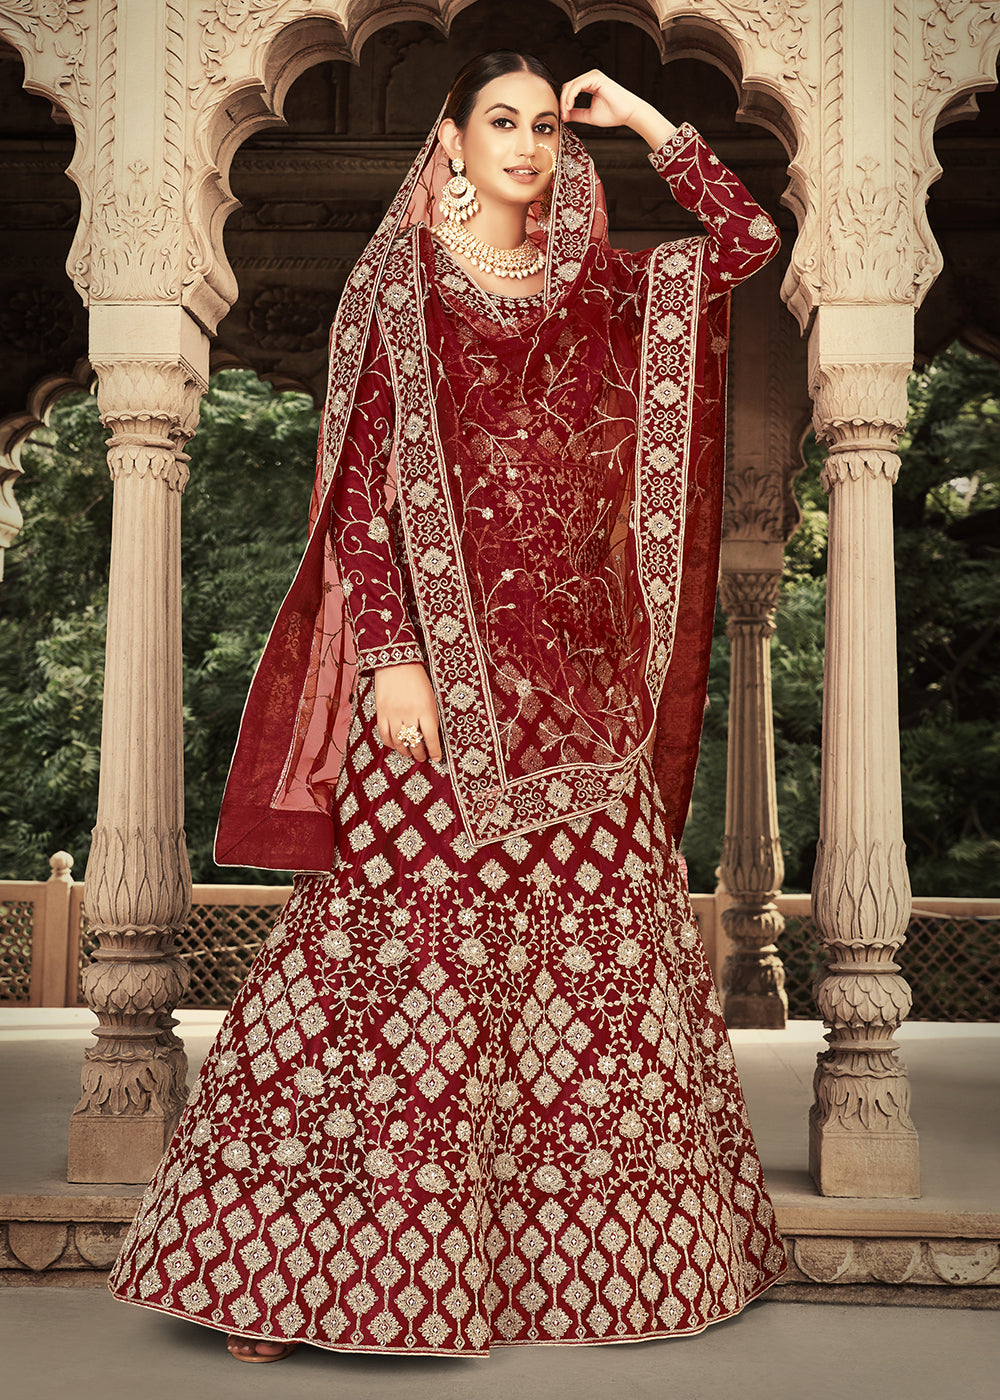 Buy Now Maroon Zarkan Diamond Embroidered Bridal Anarkali Suit Online in Canada at Empress Clothing.